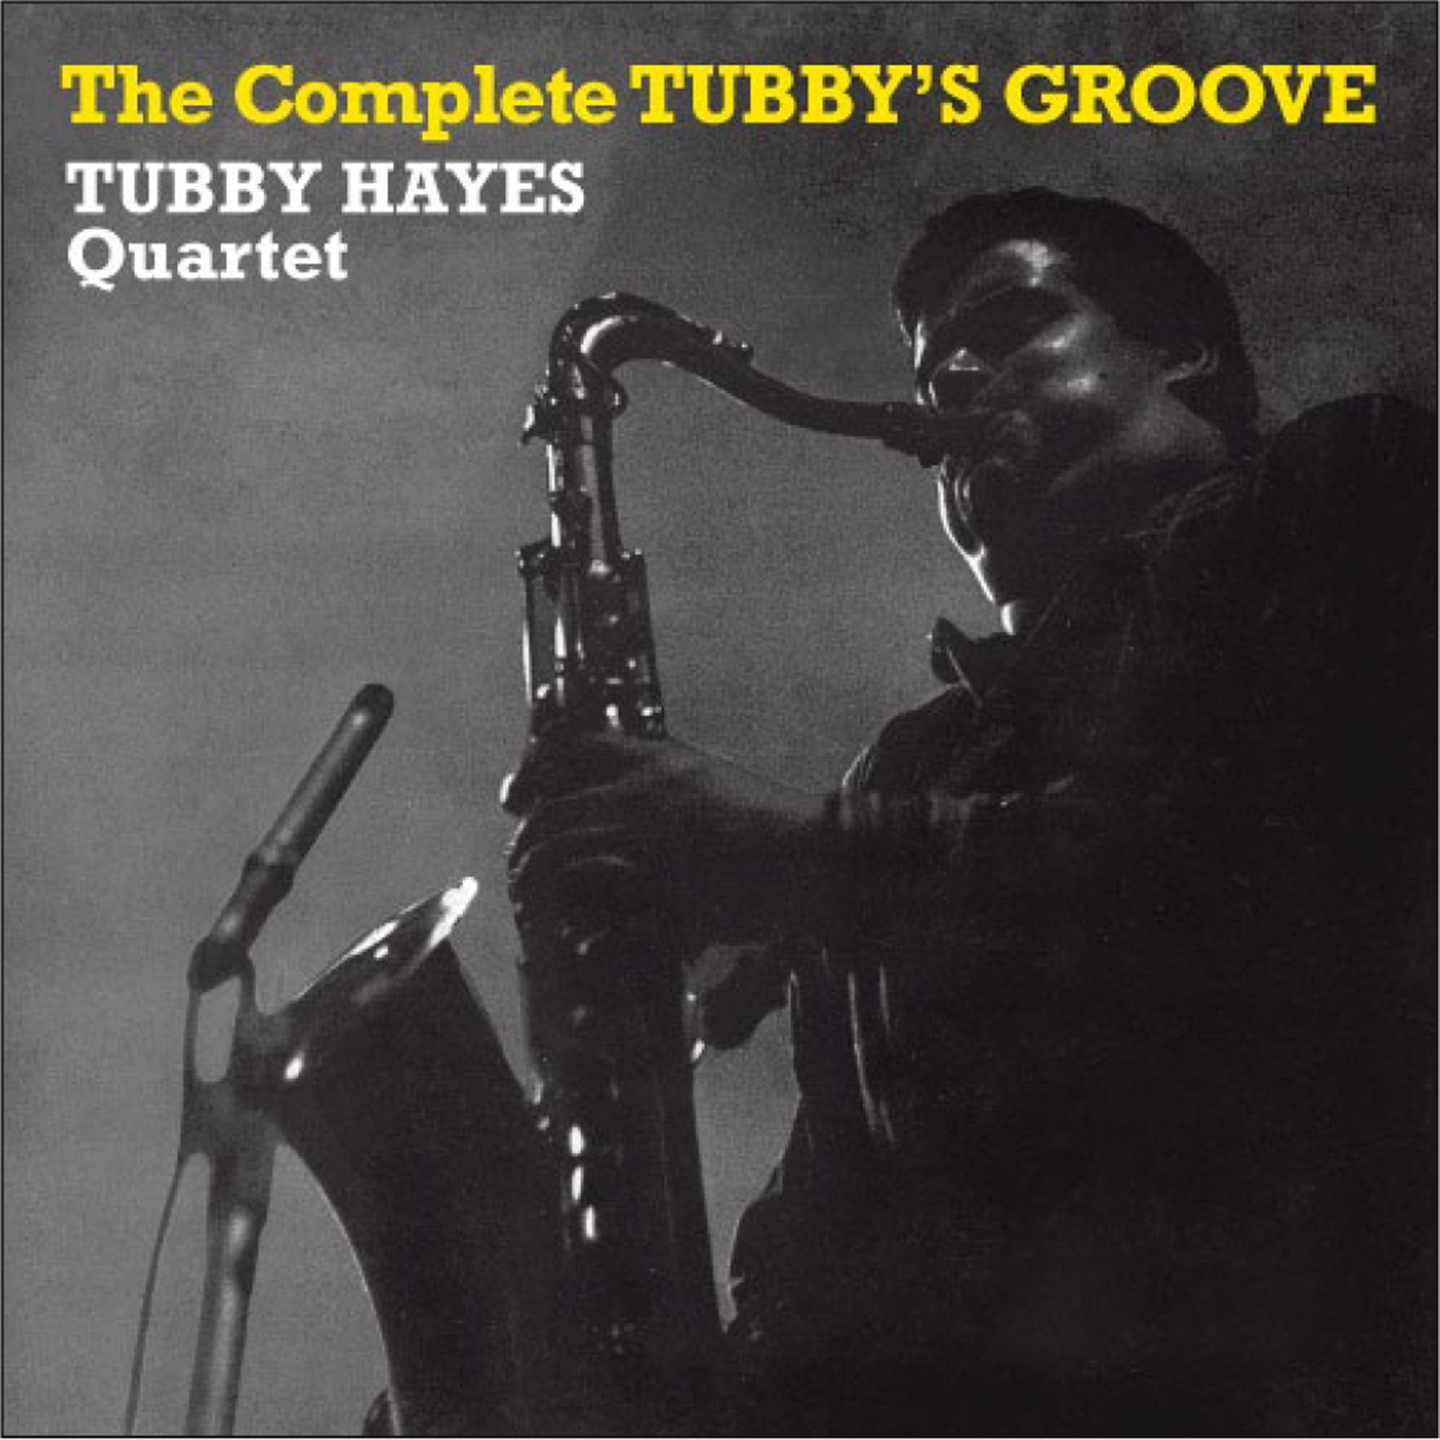 THE COMPLETE TUBBY'S GROOVE